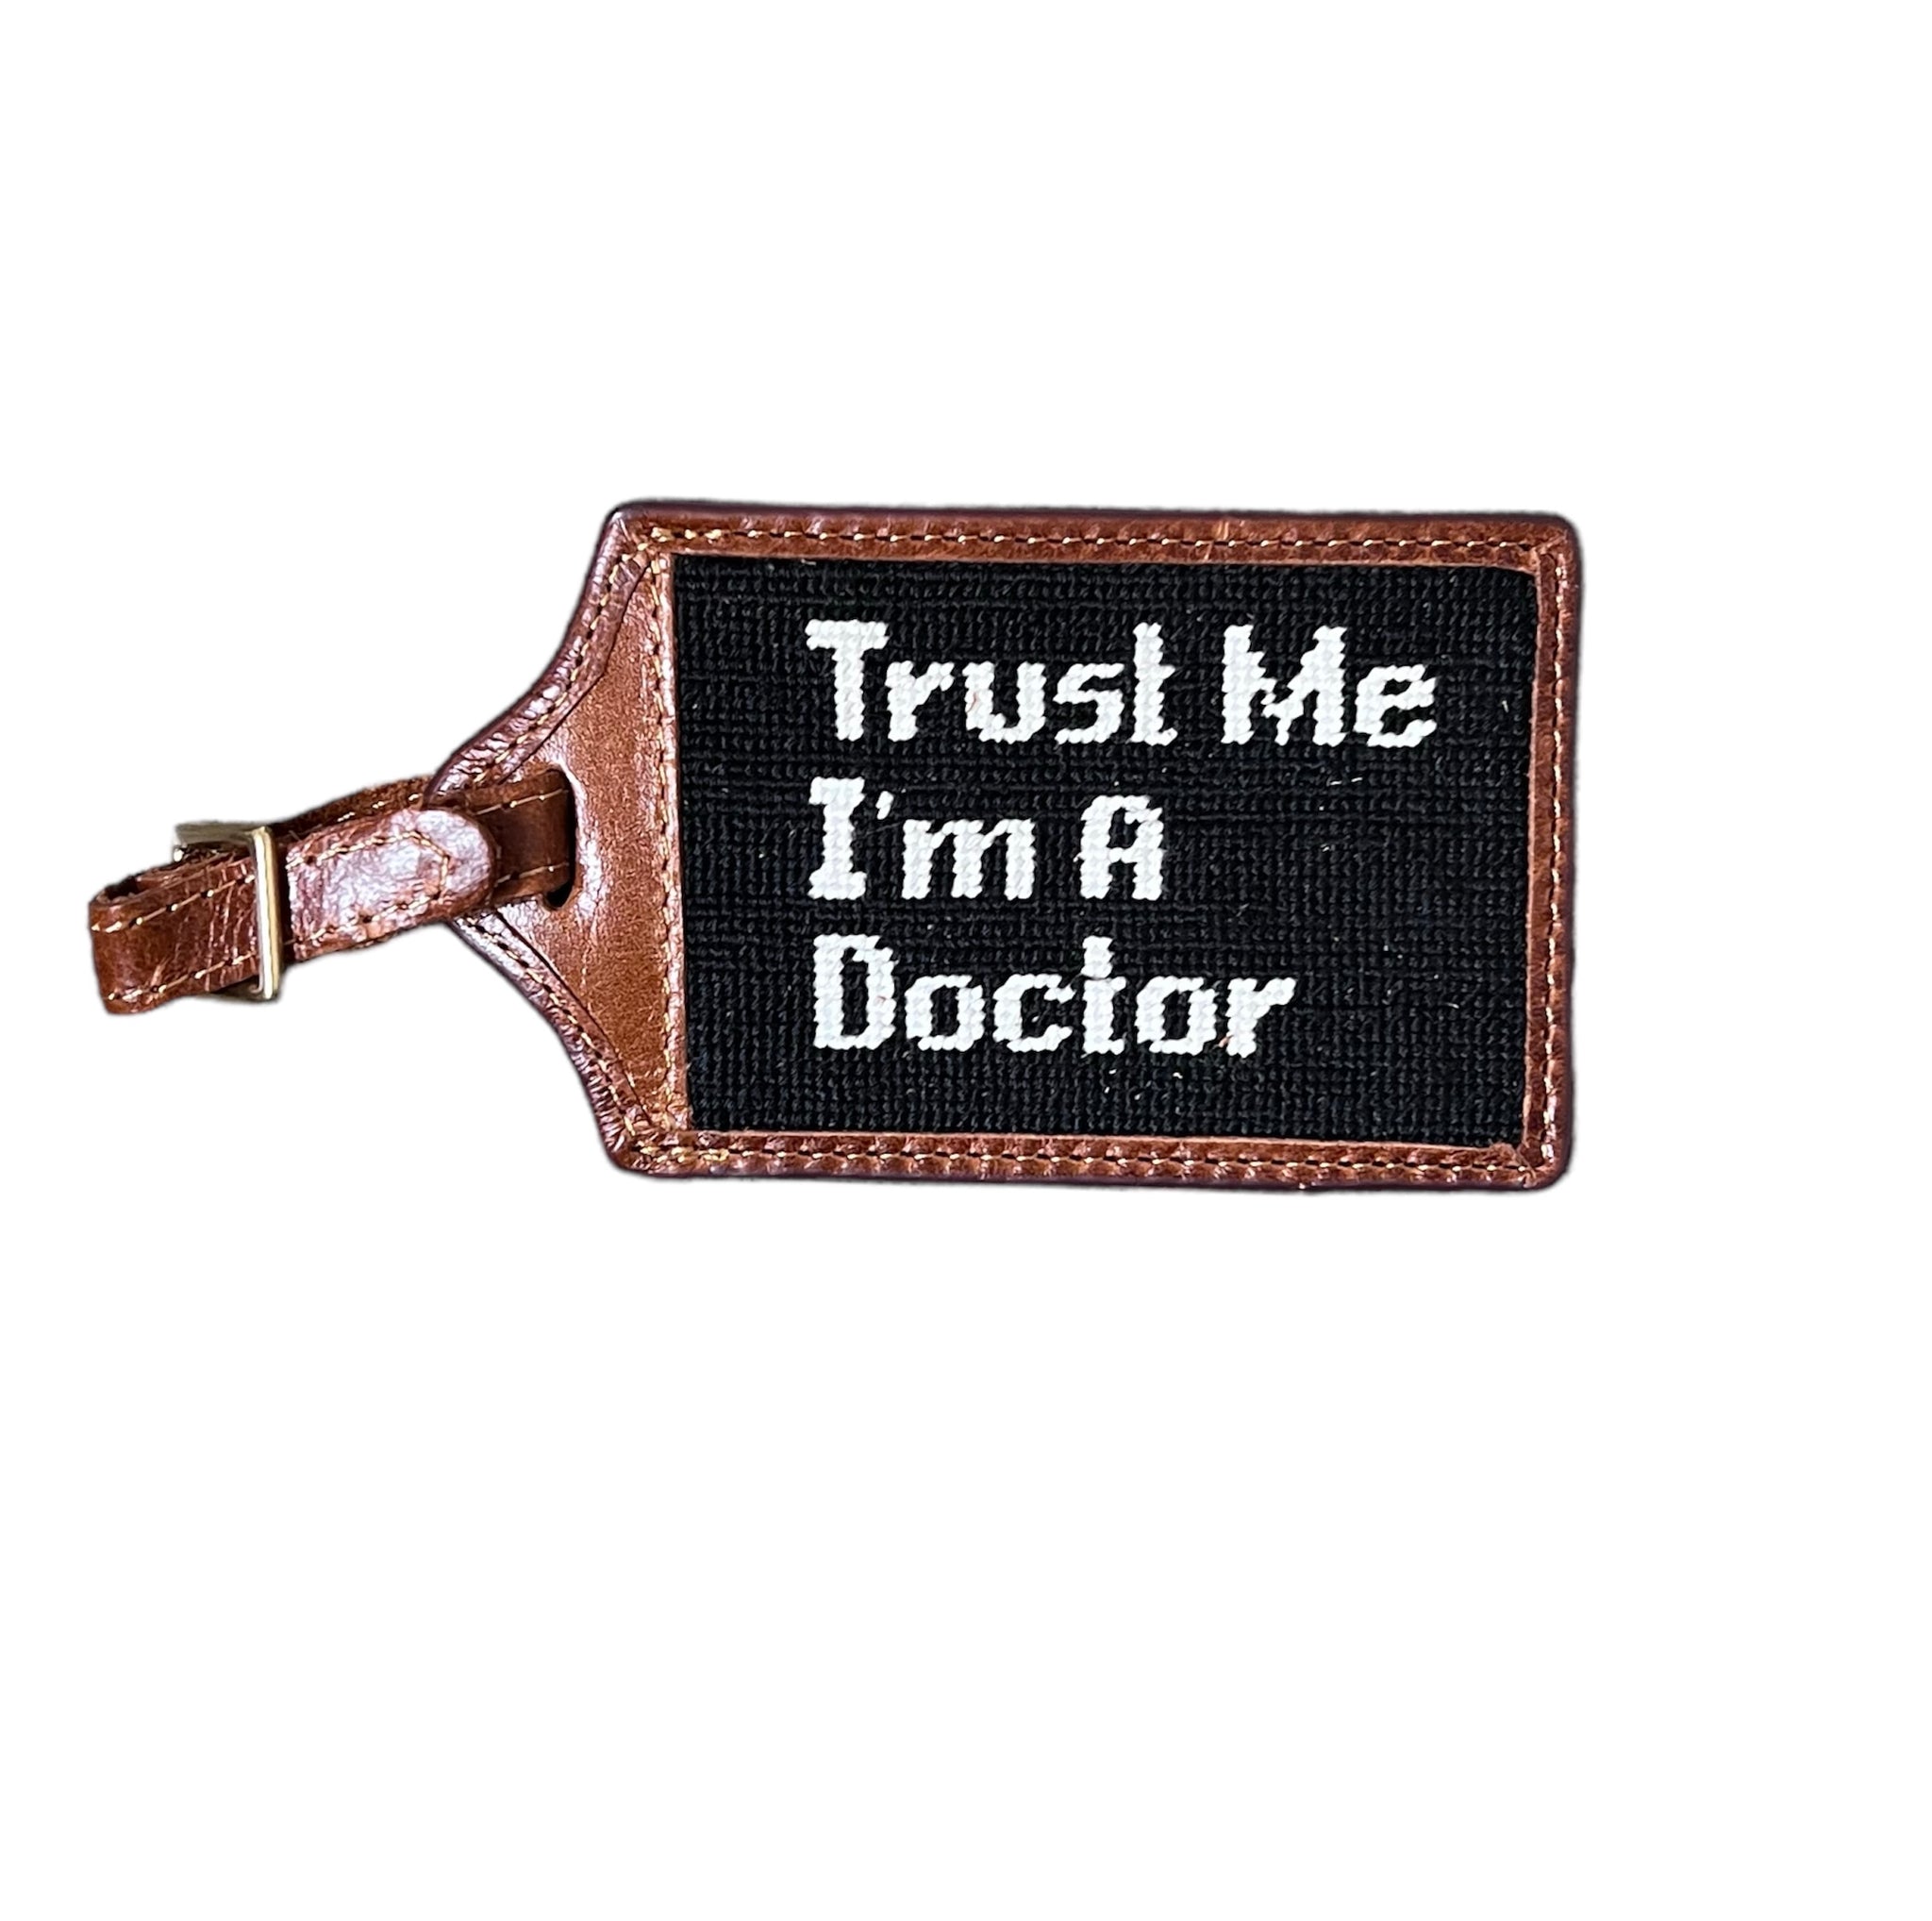 TRUST ME I'M A DOCTOR LUGGAGE TAG